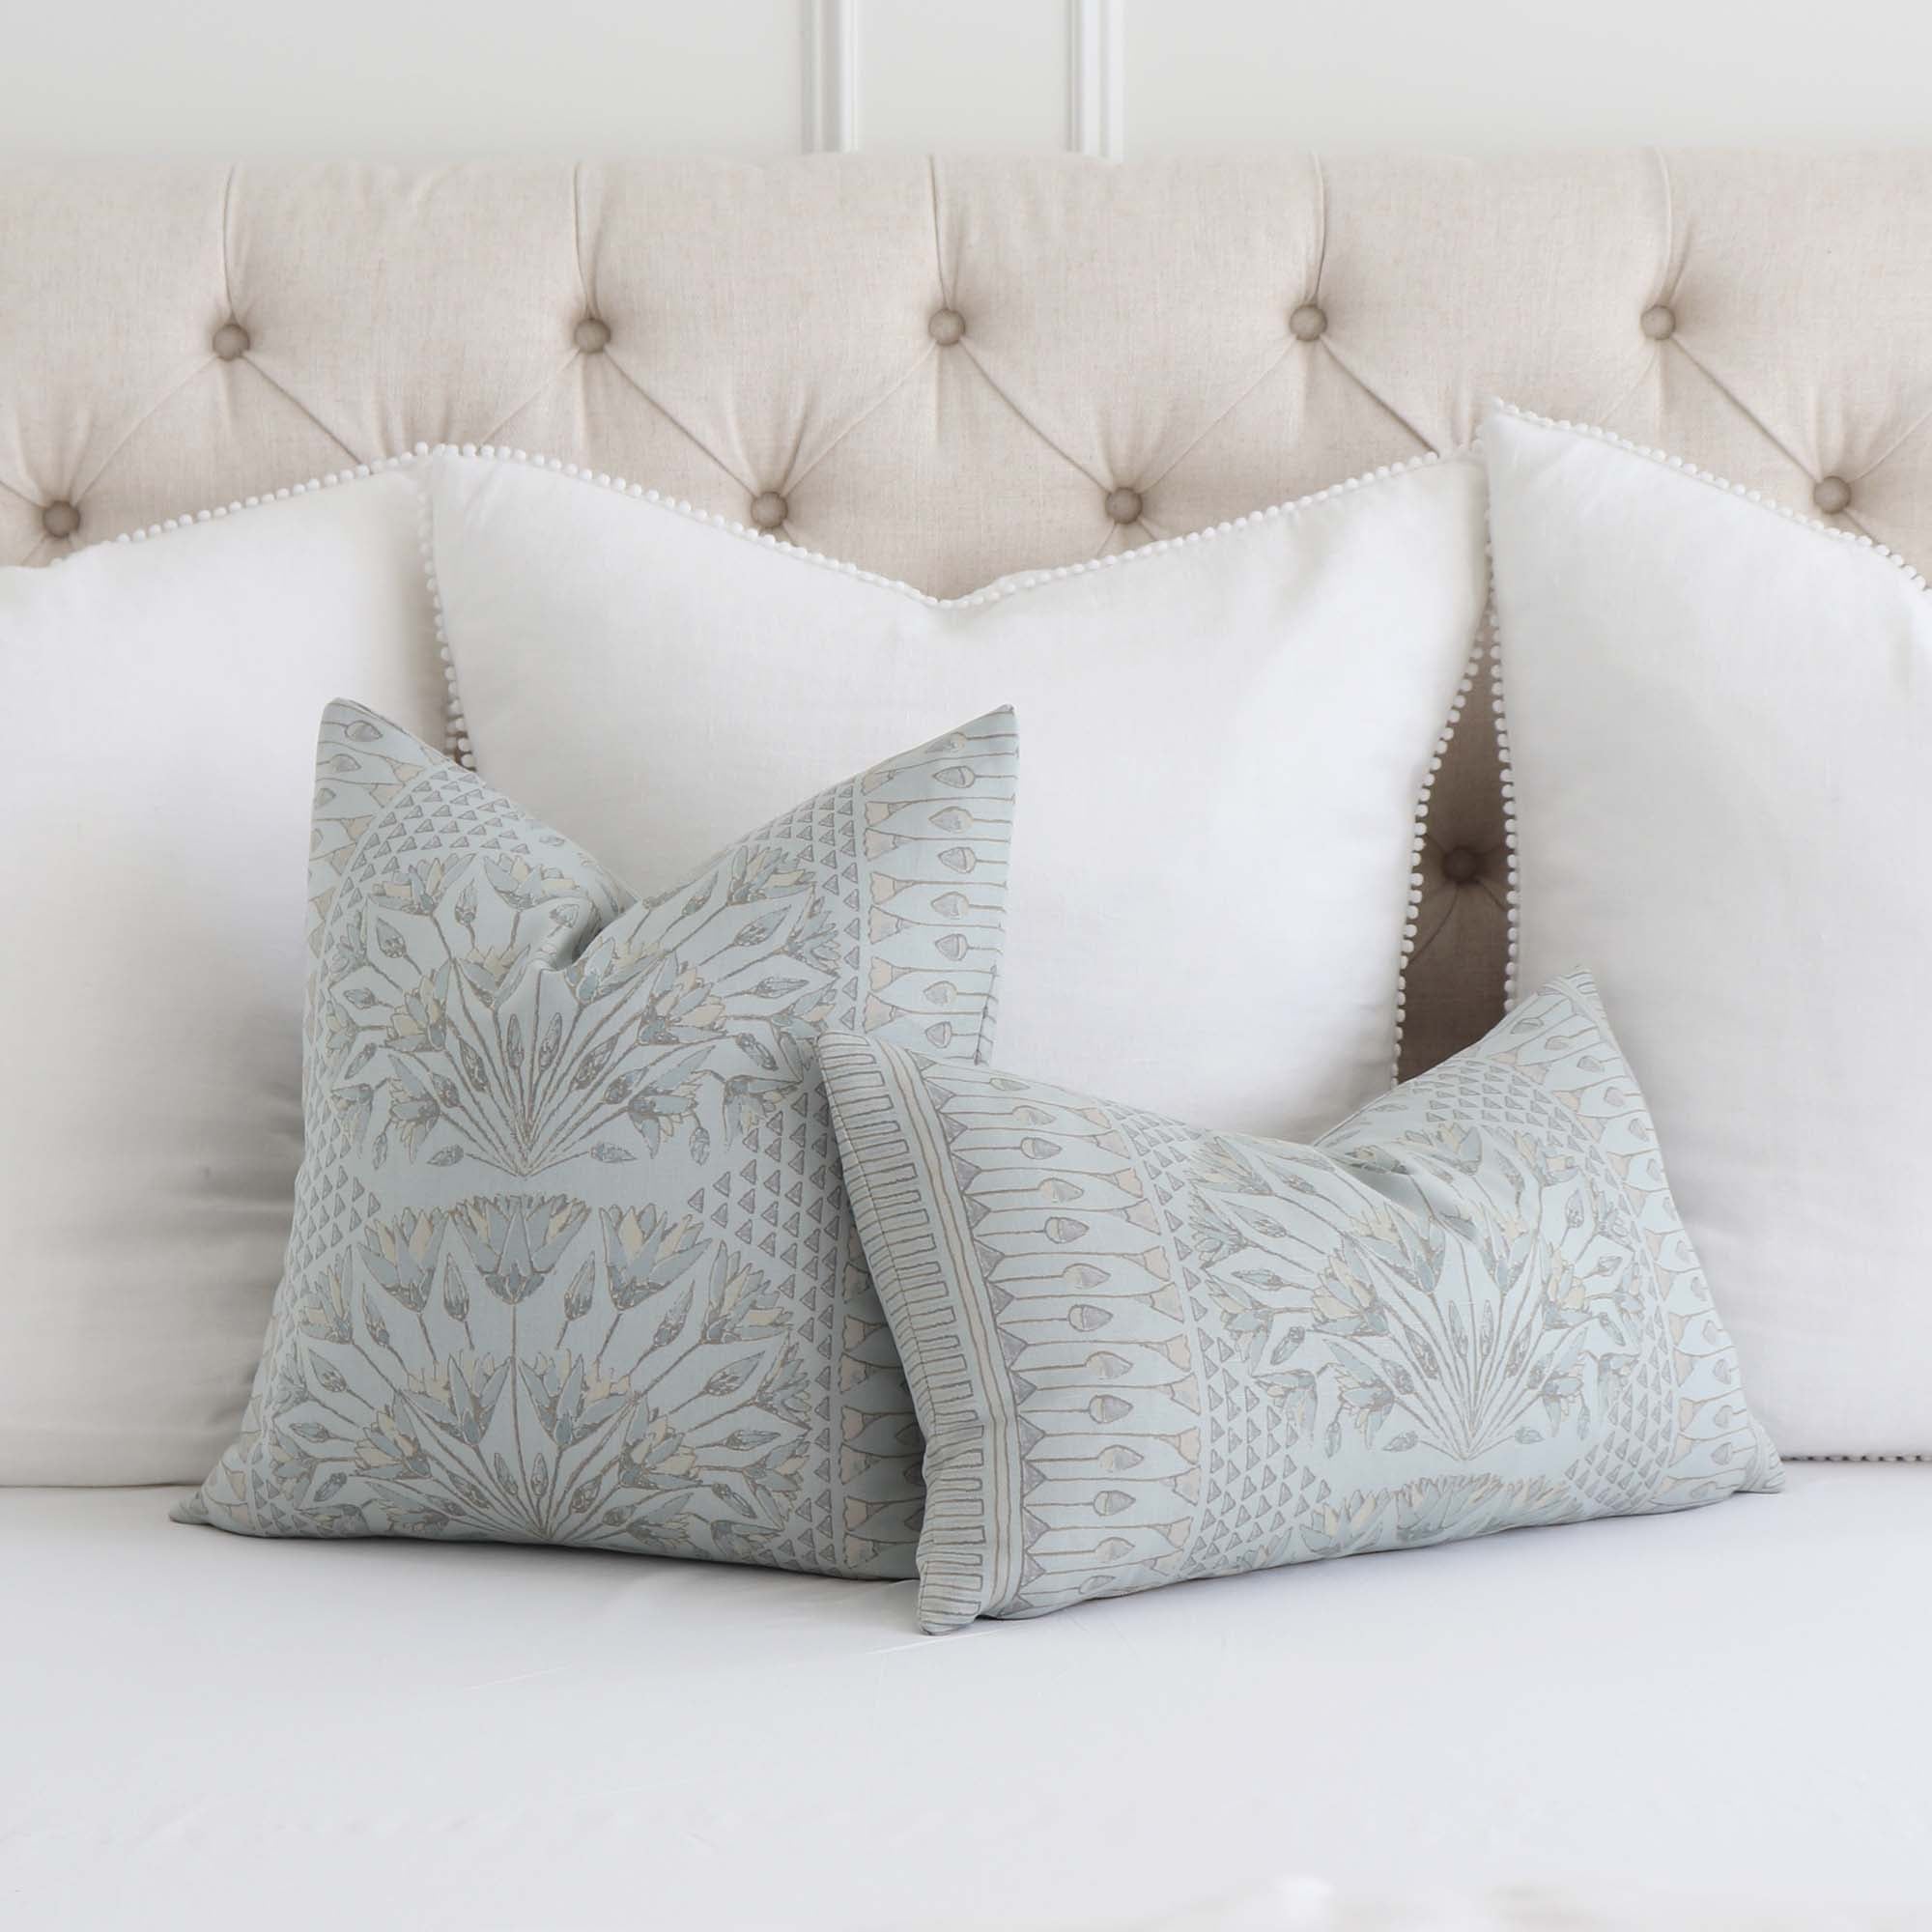 Thibaut Anna French Cairo Floral Spa Blue Designer Luxury Throw Pillow Cover with Euro White Linen Shams